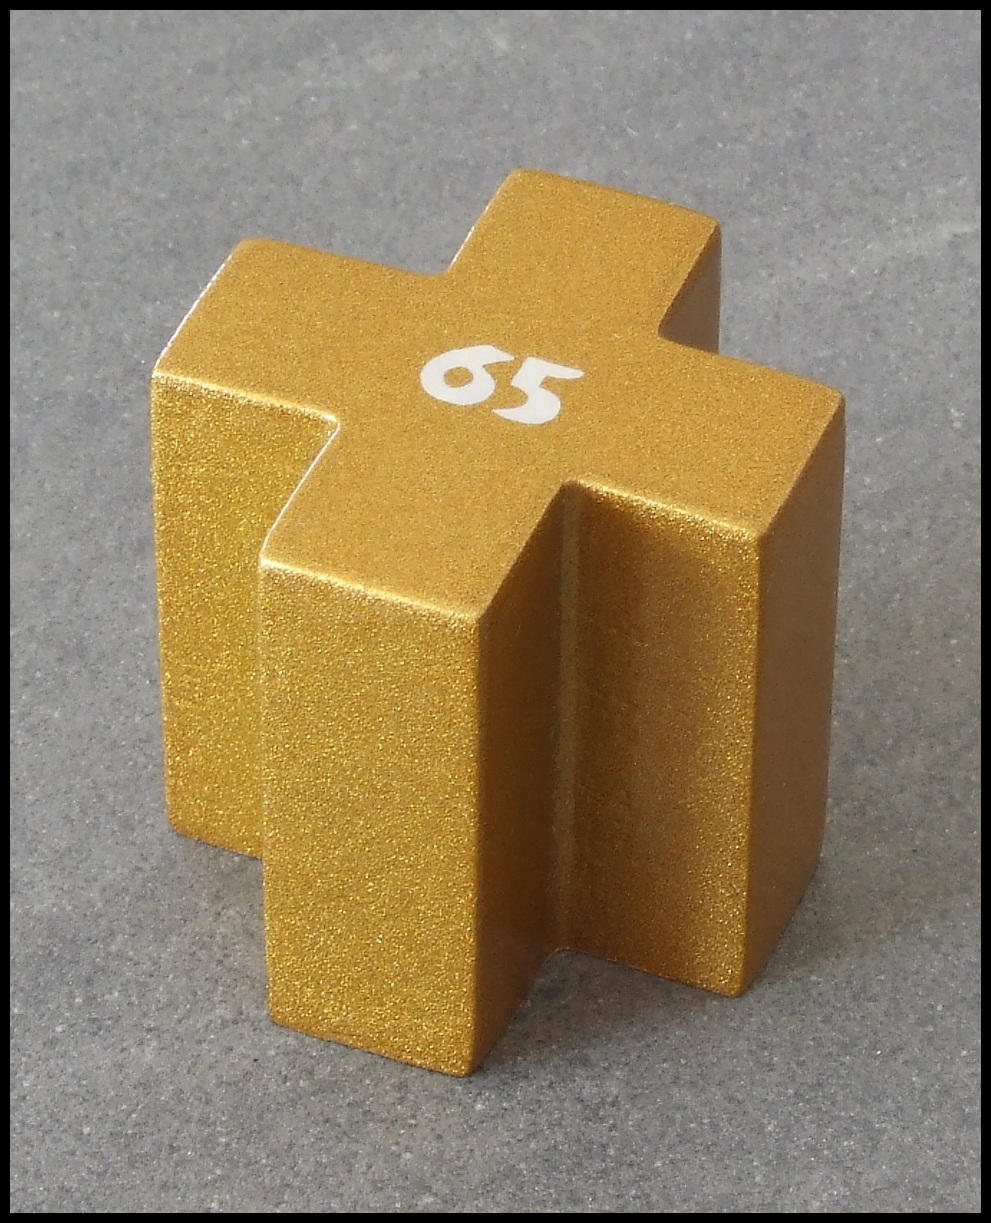 Totem - The 65 Gold Piece